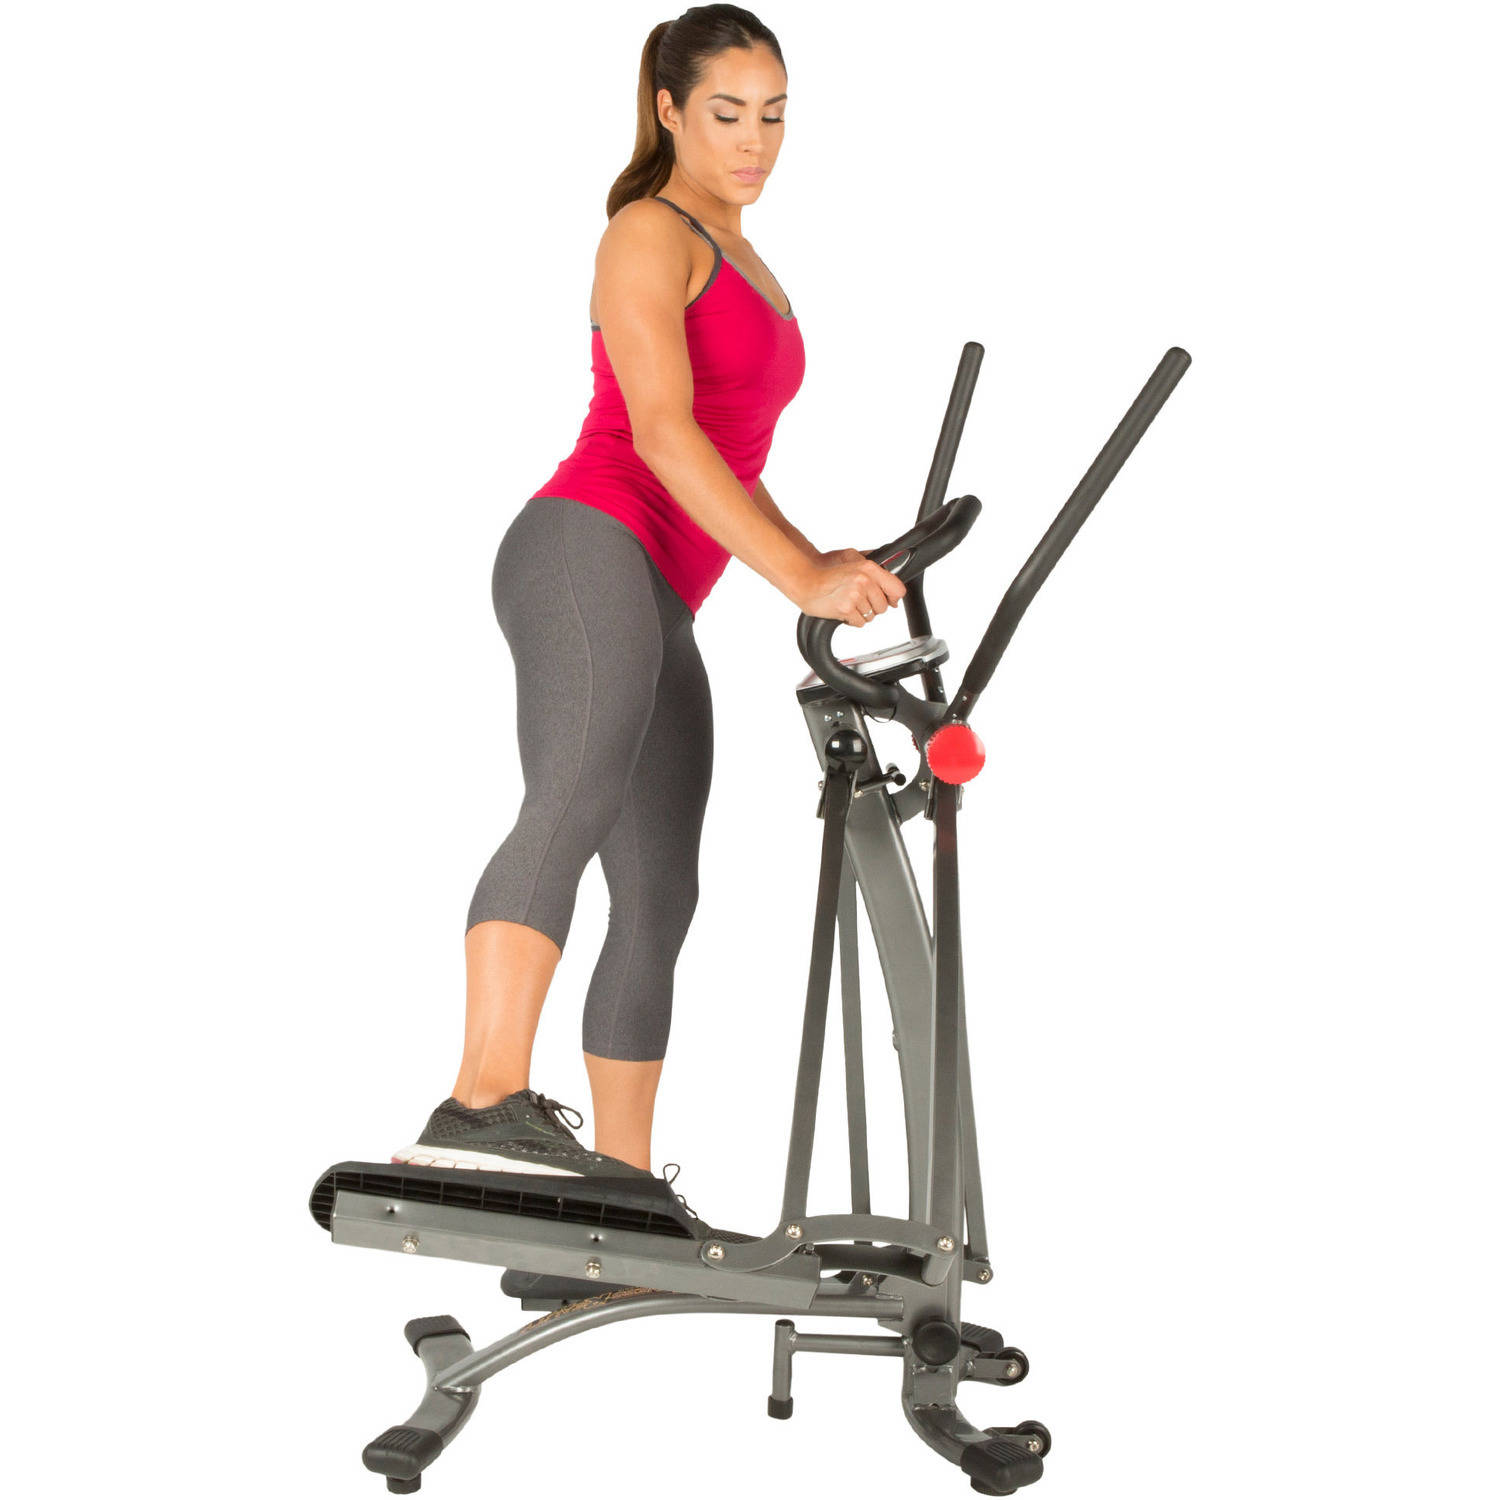 Fitness Reality Multi-Direction Elliptical Cloud Walker X1 with Pulse Sensors - image 14 of 31